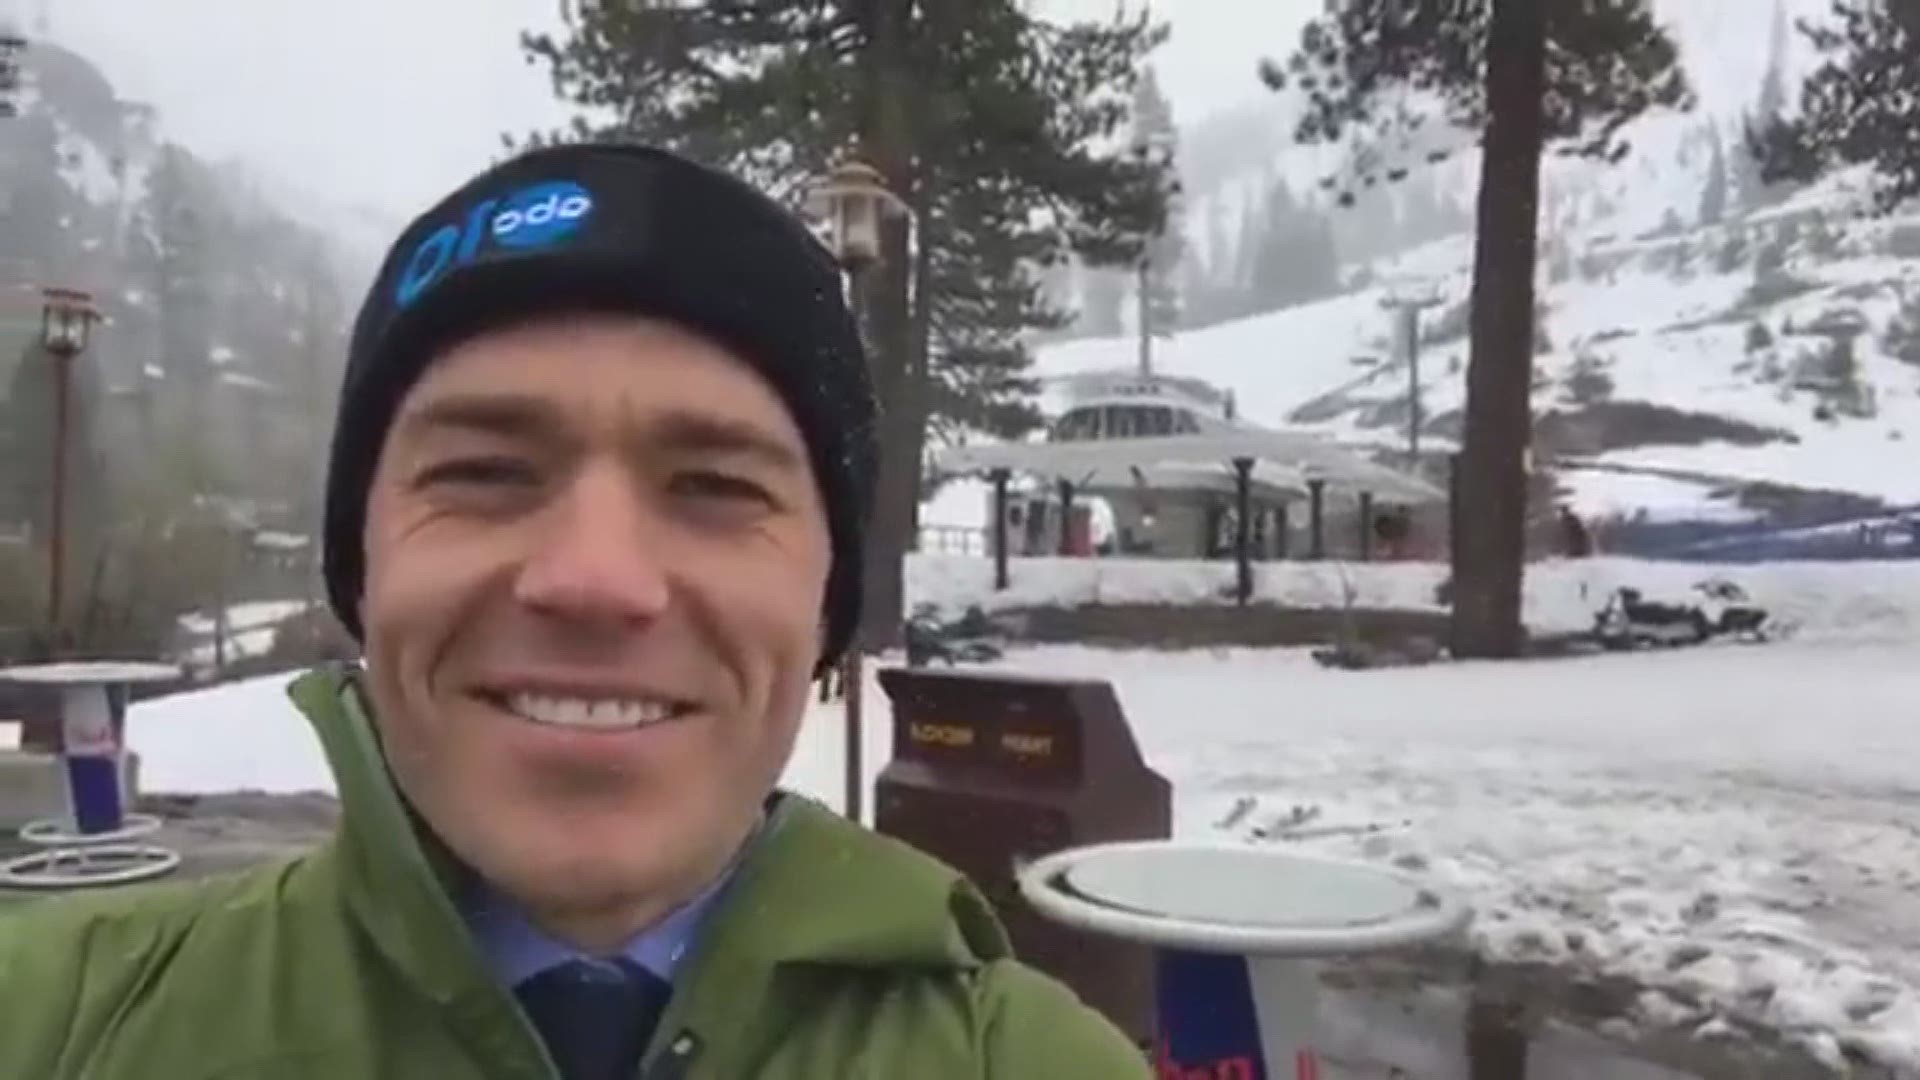 It's certainly a treat to be able to board or ski in May! Mike Duffy went live at Squaw Valley to speak with a few folks who drove up to take advantage of the fresh snow.